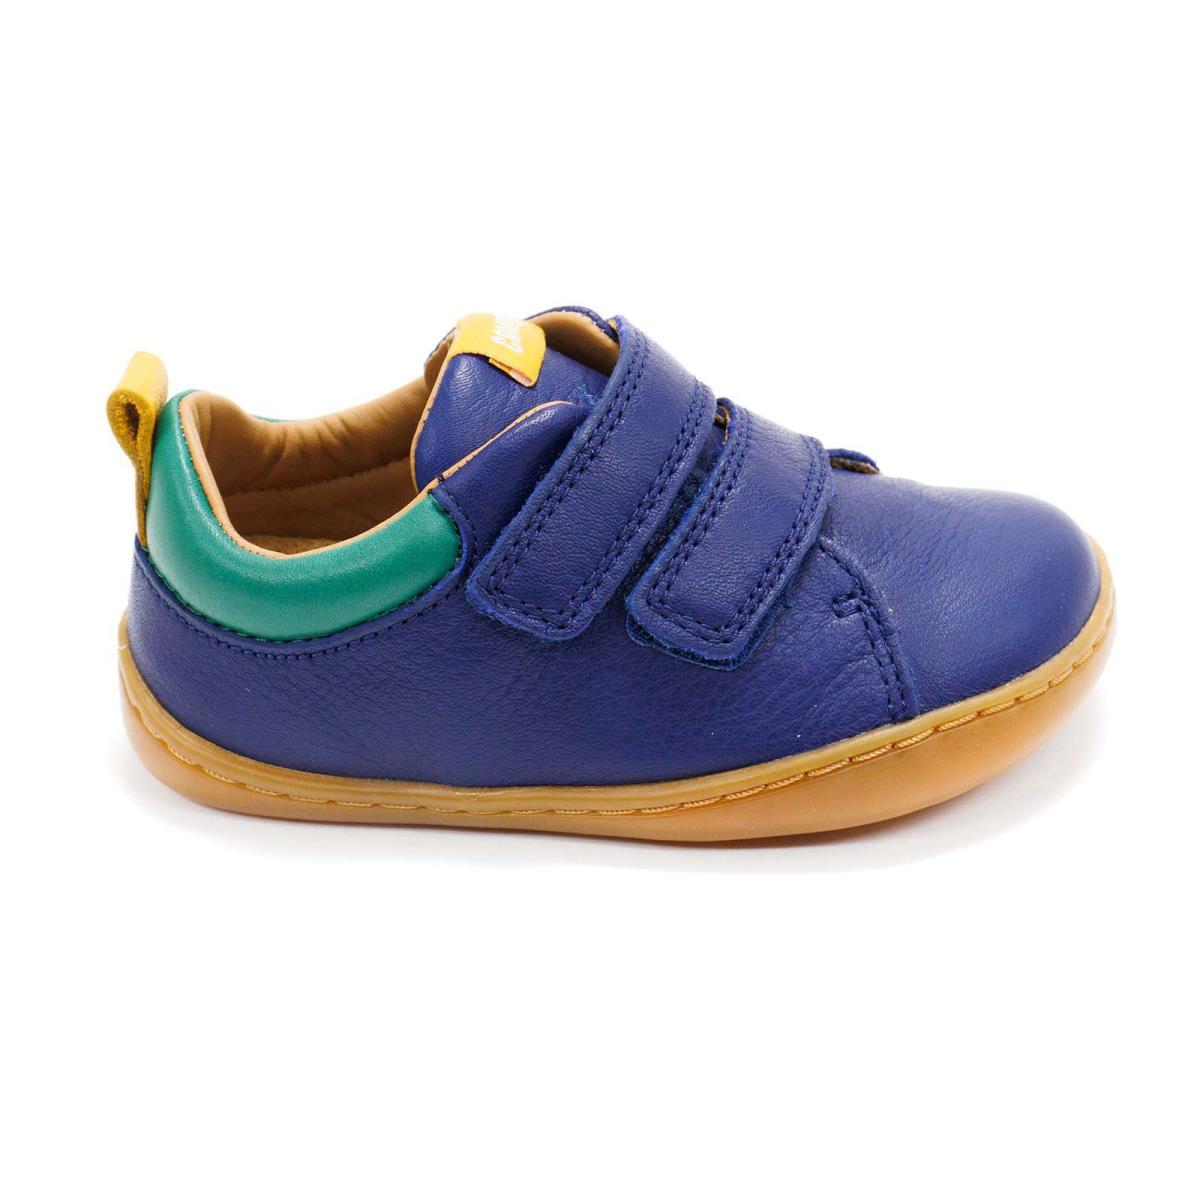 Infant Camper Peu Cami Leather Sneakers with Hook and Loop Closure Toddler Shoes